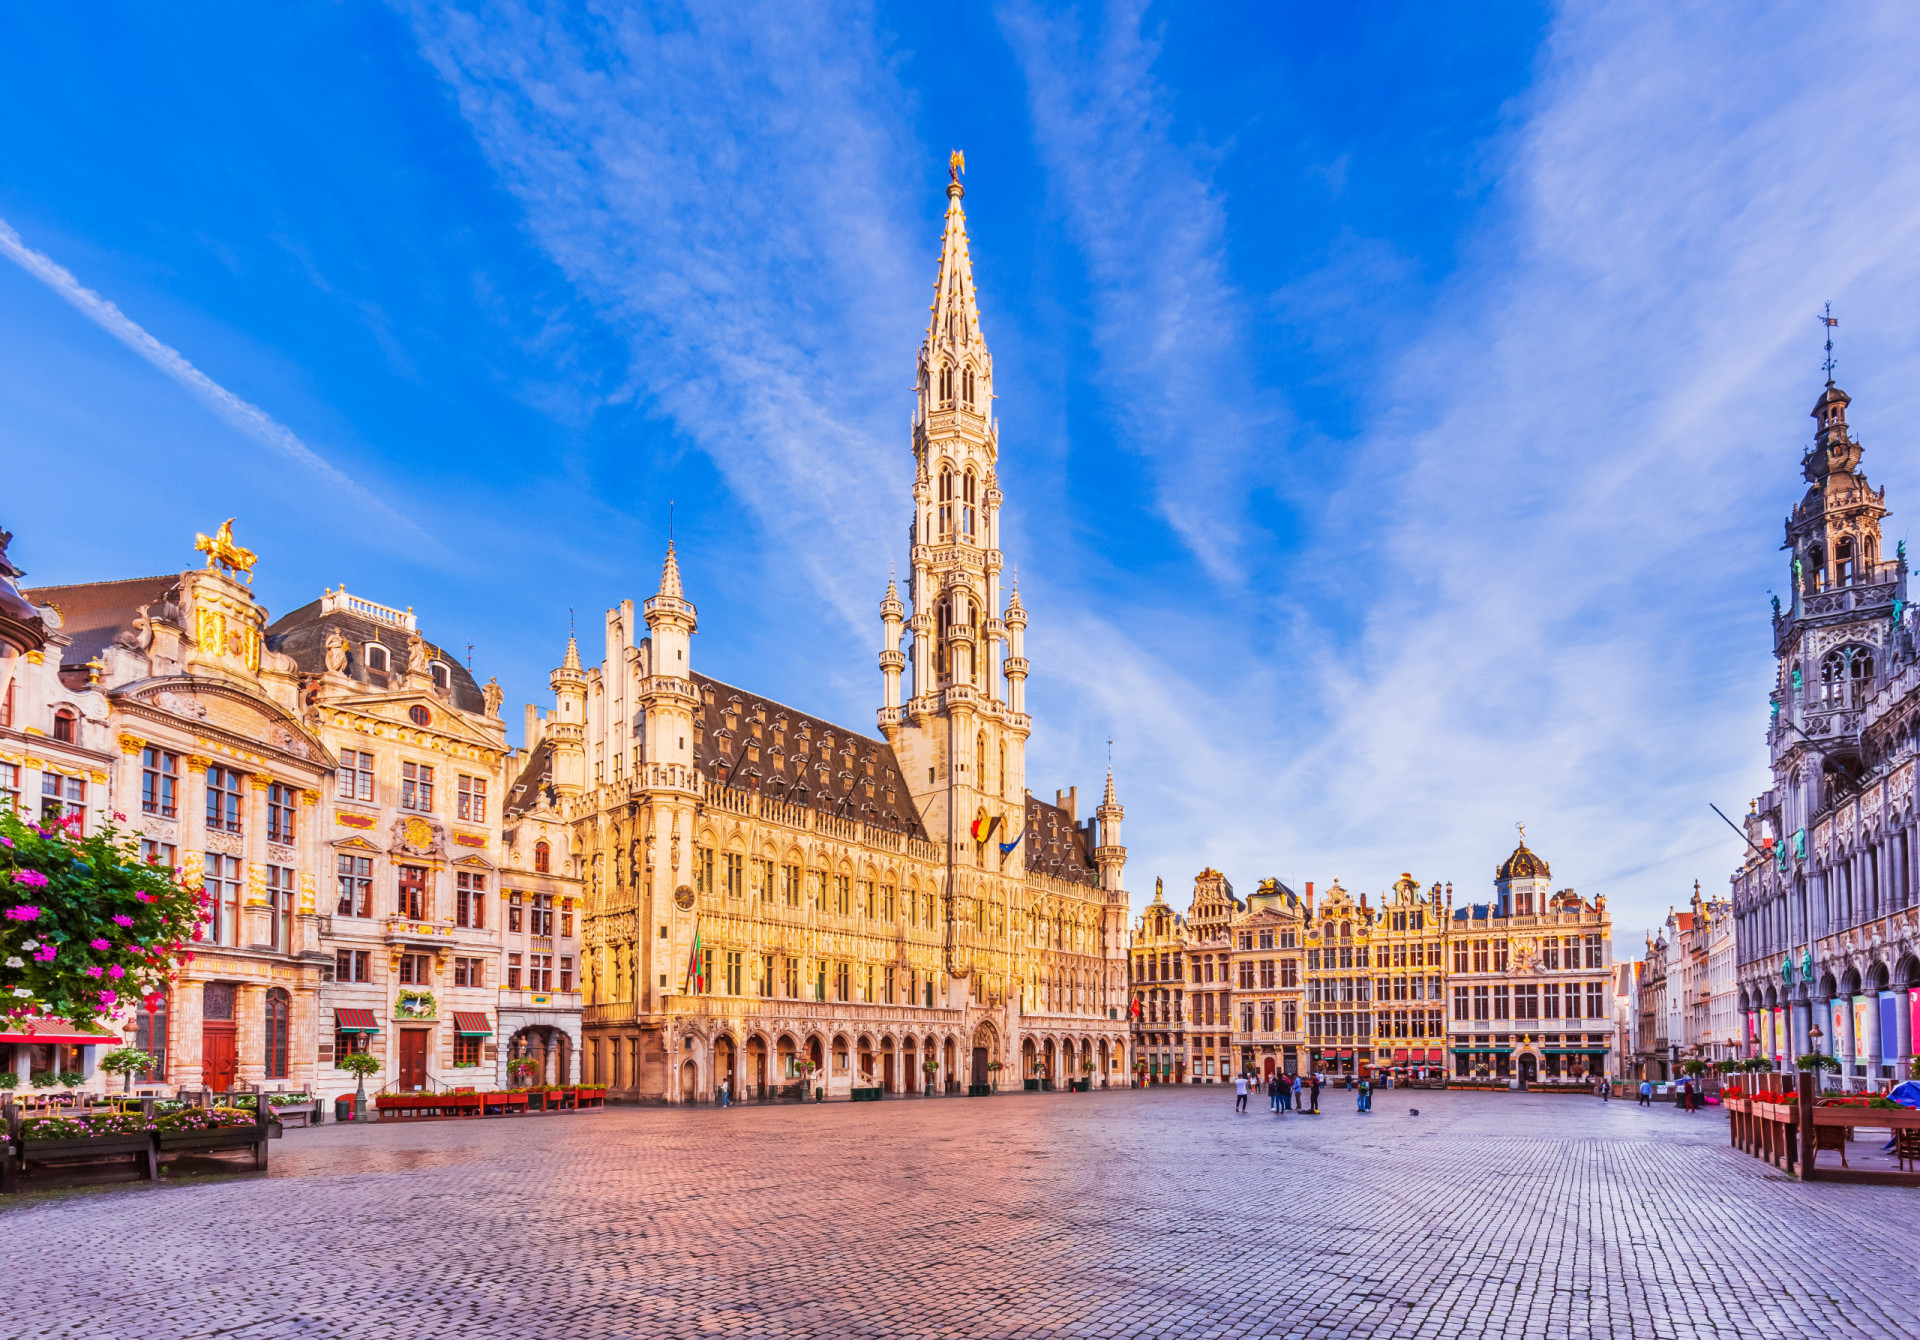 <p>In Brussels, tourist tax varies depending on a hotel's size and rating, and can reach €7.50 (US$8.17) per night. However, it varies from city to city.</p><p>You may also like:<a href="https://www.starsinsider.com/n/210086?utm_source=msn.com&utm_medium=display&utm_campaign=referral_description&utm_content=683481en-my"> A ranking of the creepiest movie characters we love to fear</a></p>